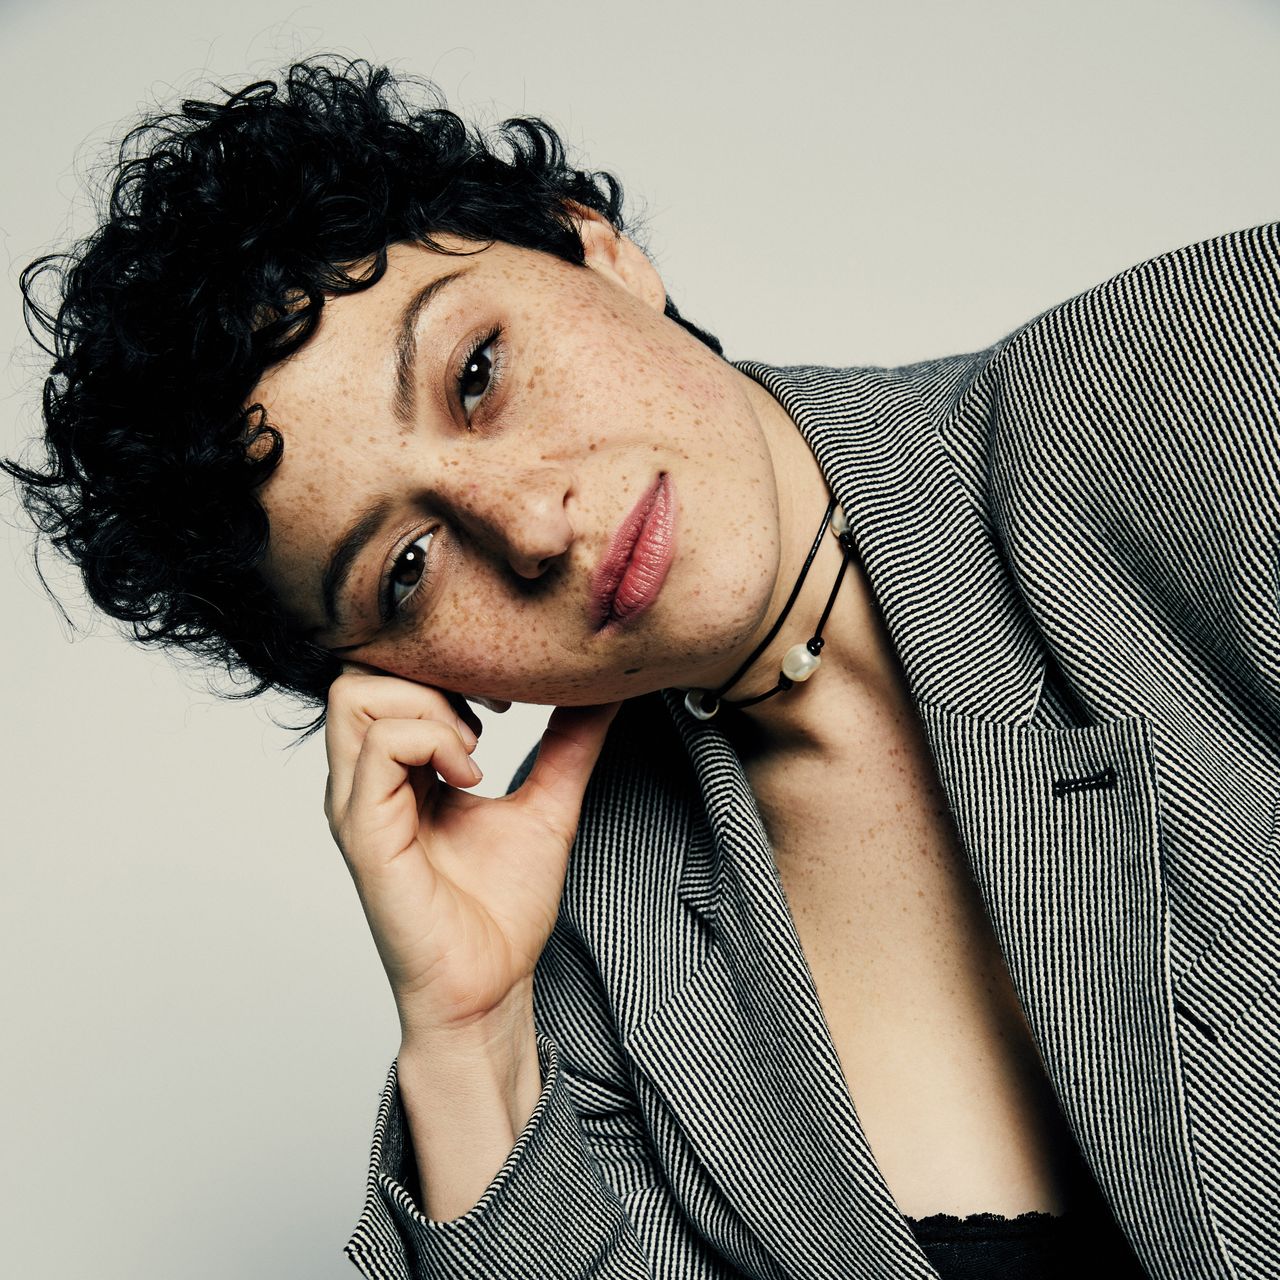 Alia Shawkat co-wrote "Duck Butter" over the course of five years. The second act was filmed in just 27 hours.